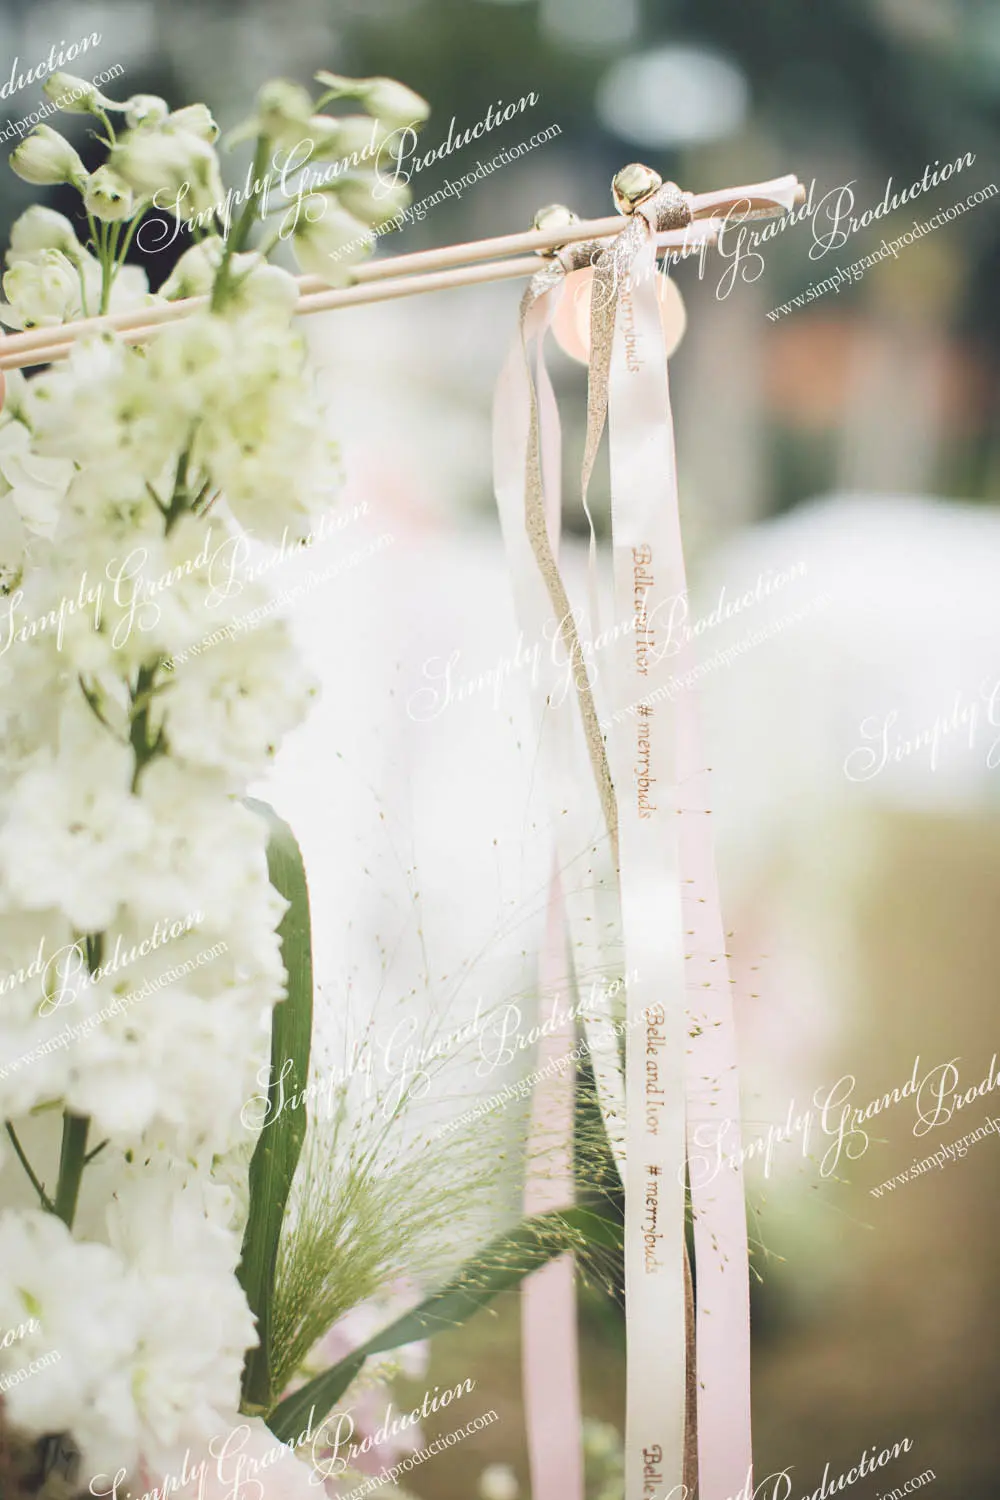 Simply_Grand_Production_Outdoor_wedding_decoration_gold_green_Repulse_Bay_1_14.jpg